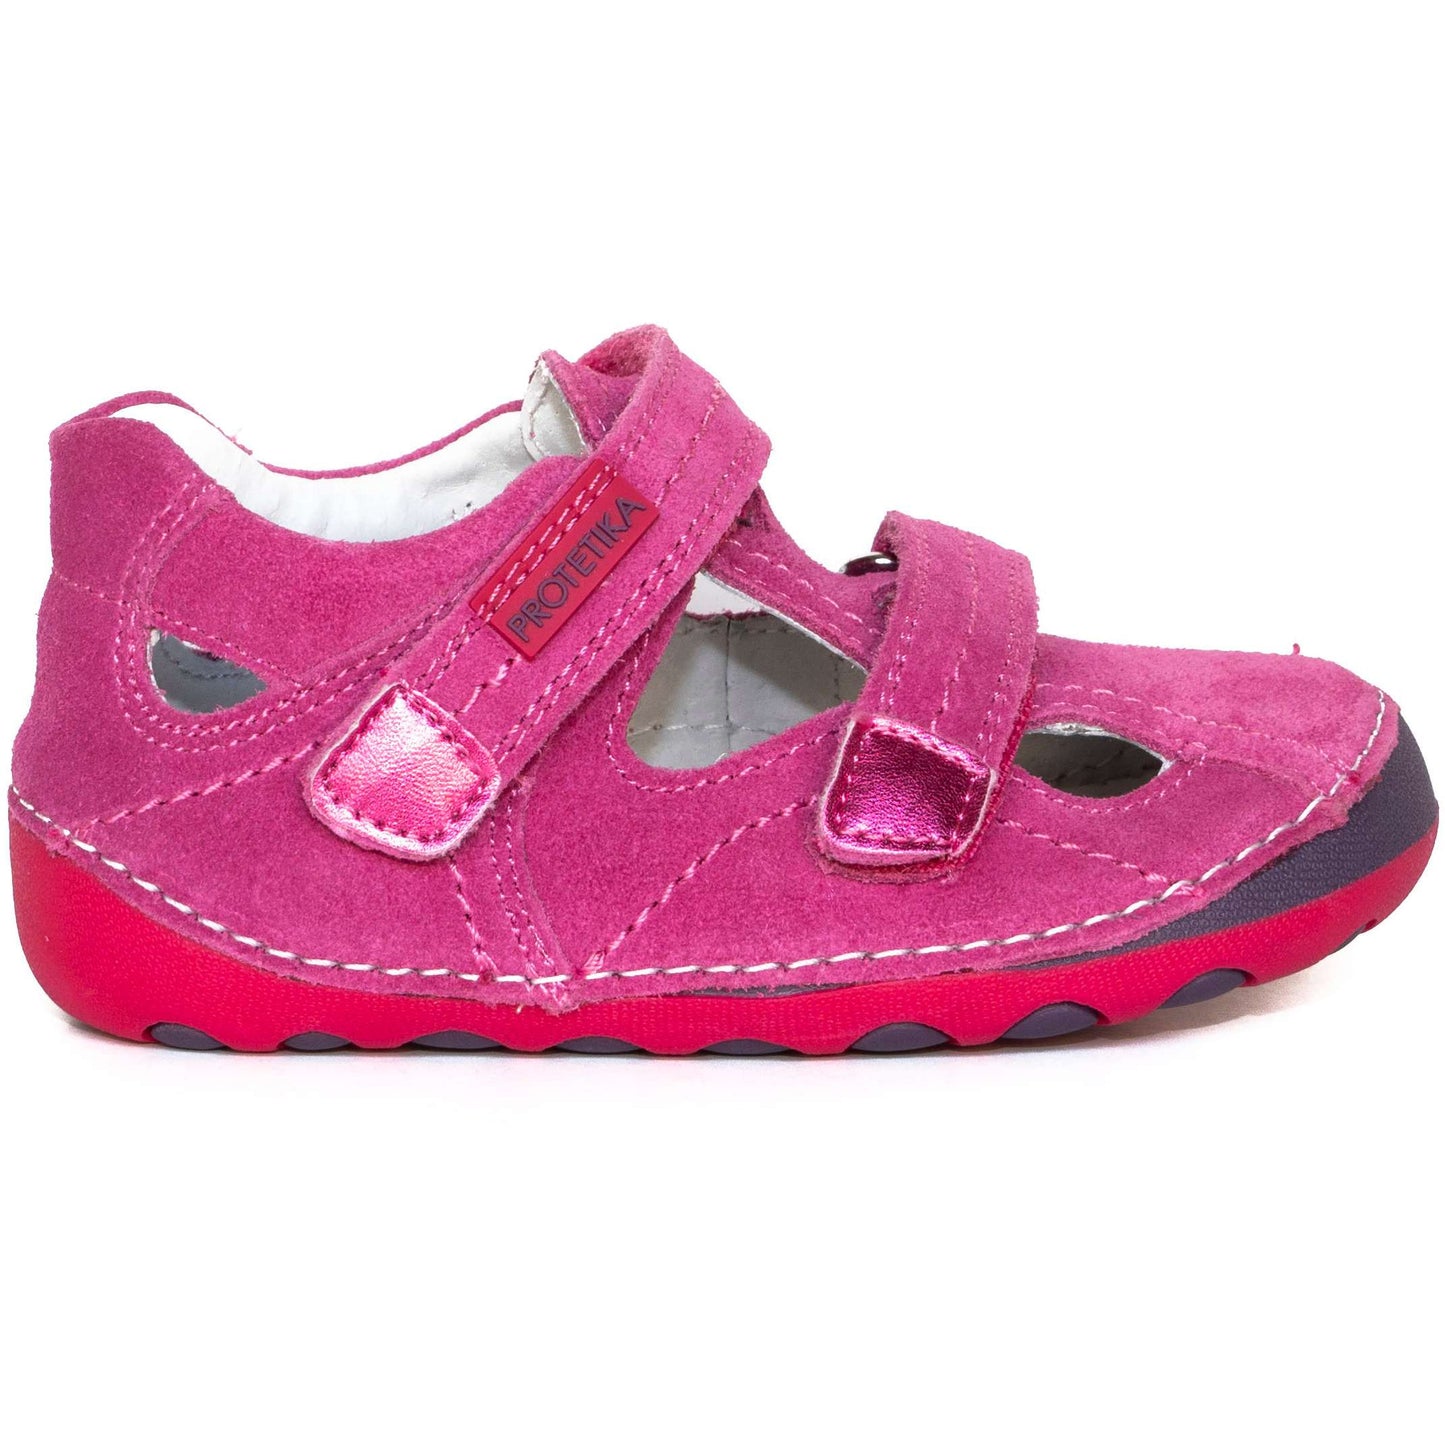 Barefoot toddler girl sneaker MELA is made from suede leather upper. You get 2 sets of insoles - one with arch support and one which is flat. The heel counter is soft. 2 velcro closures can make it fit a normal and a wider foot.